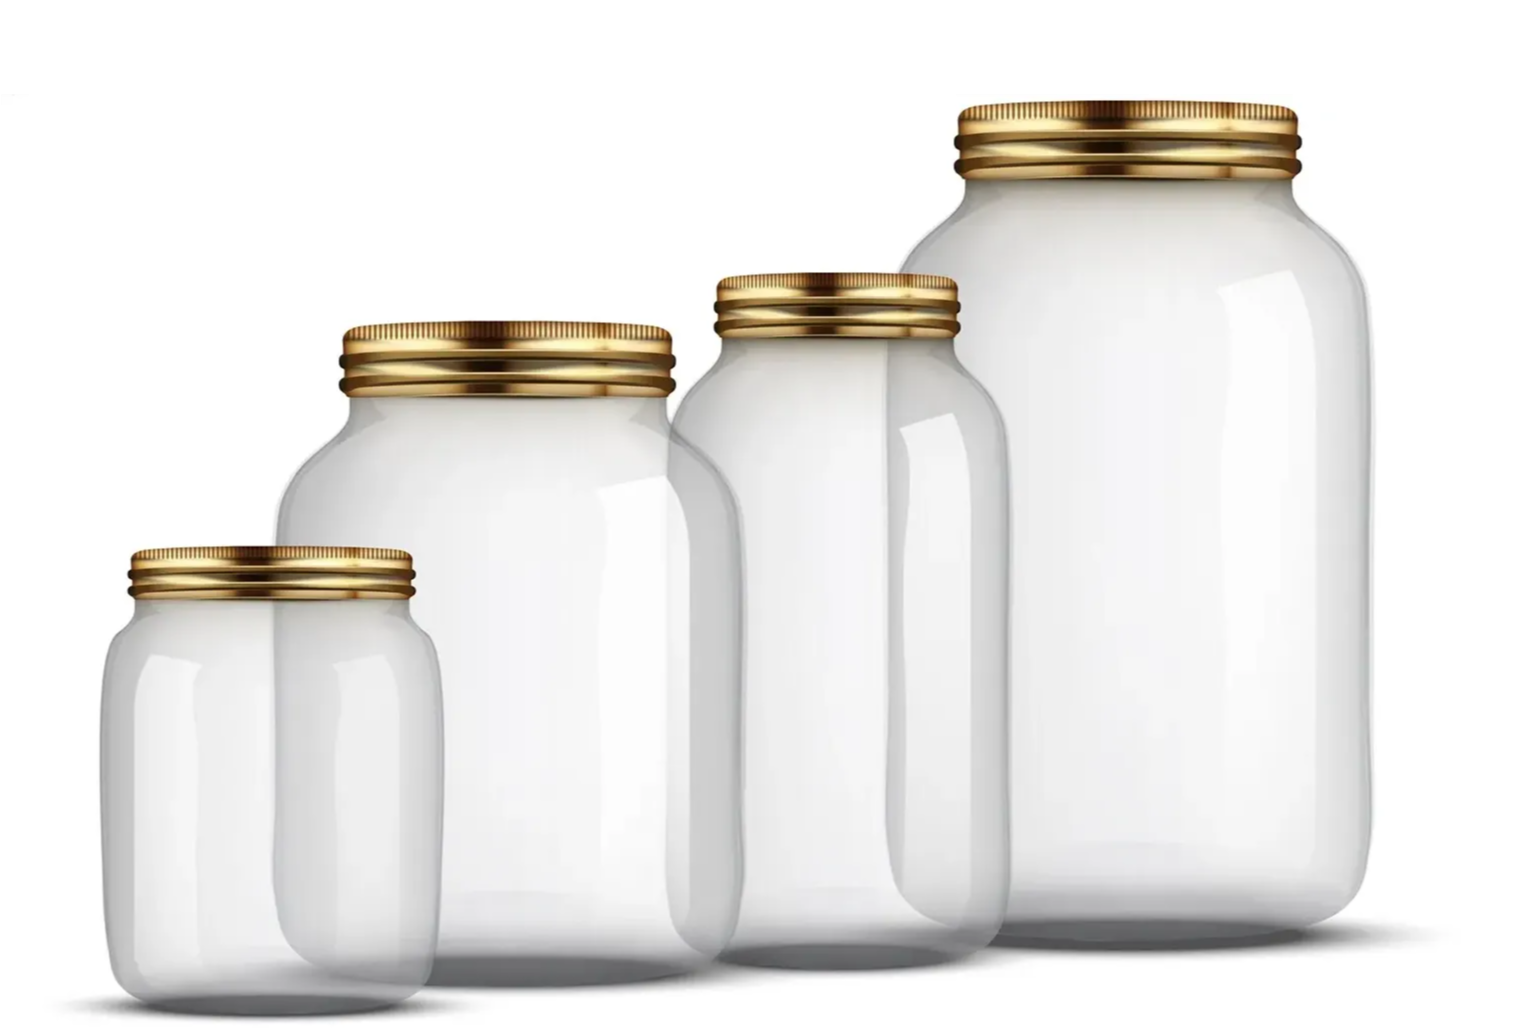 Antique Mason Jars: How to Date & Identify